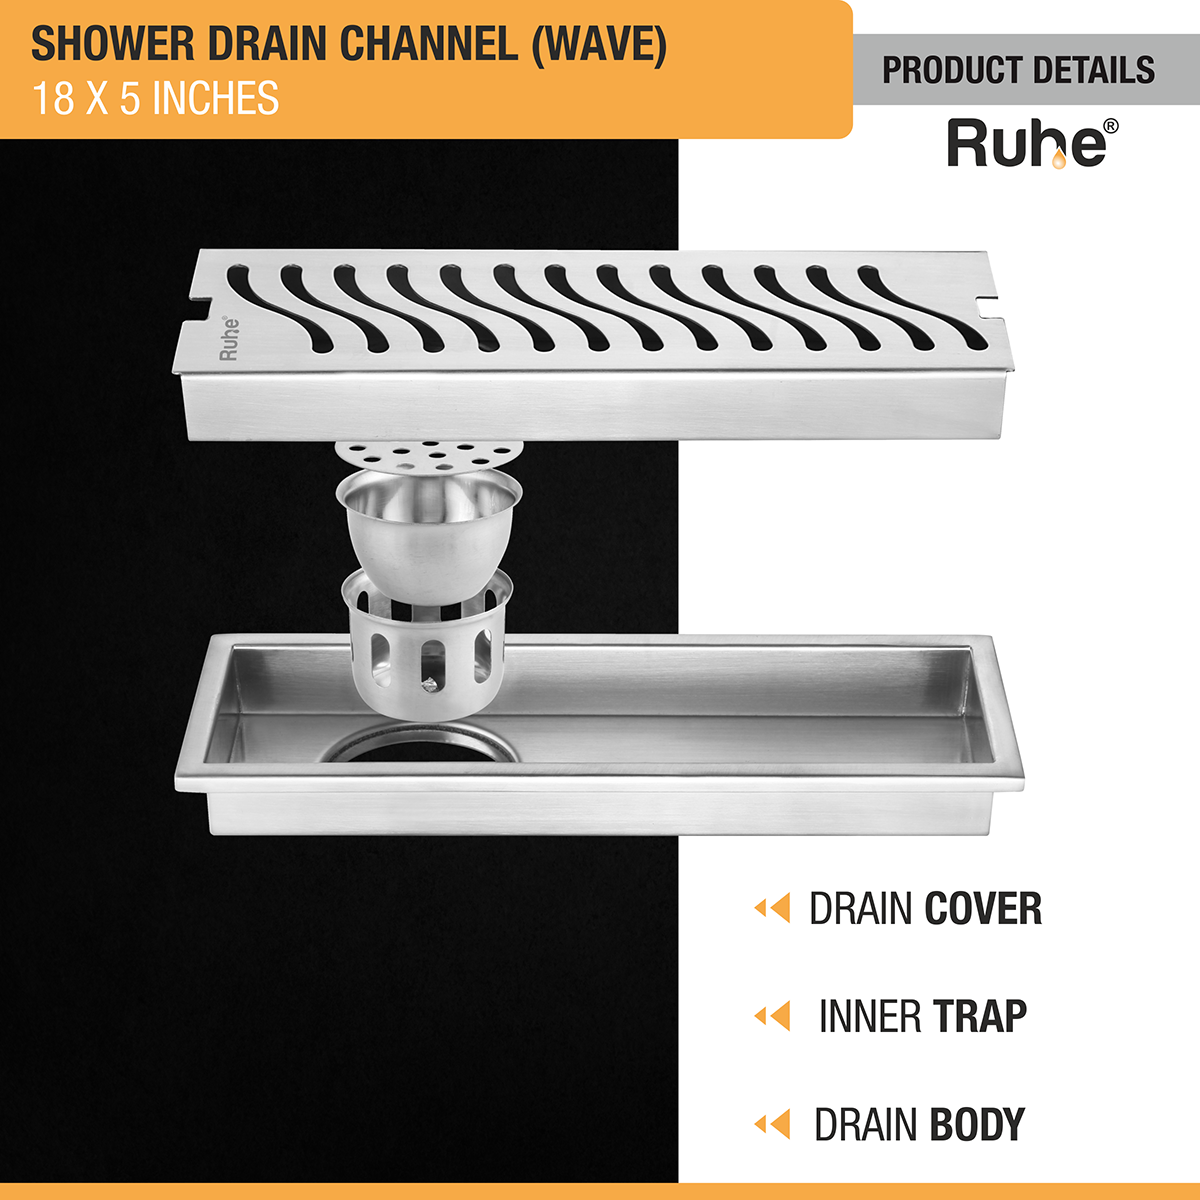 Wave Shower Drain Channel (18 X 5 Inches) with Cockroach Trap (304 Grade) product details